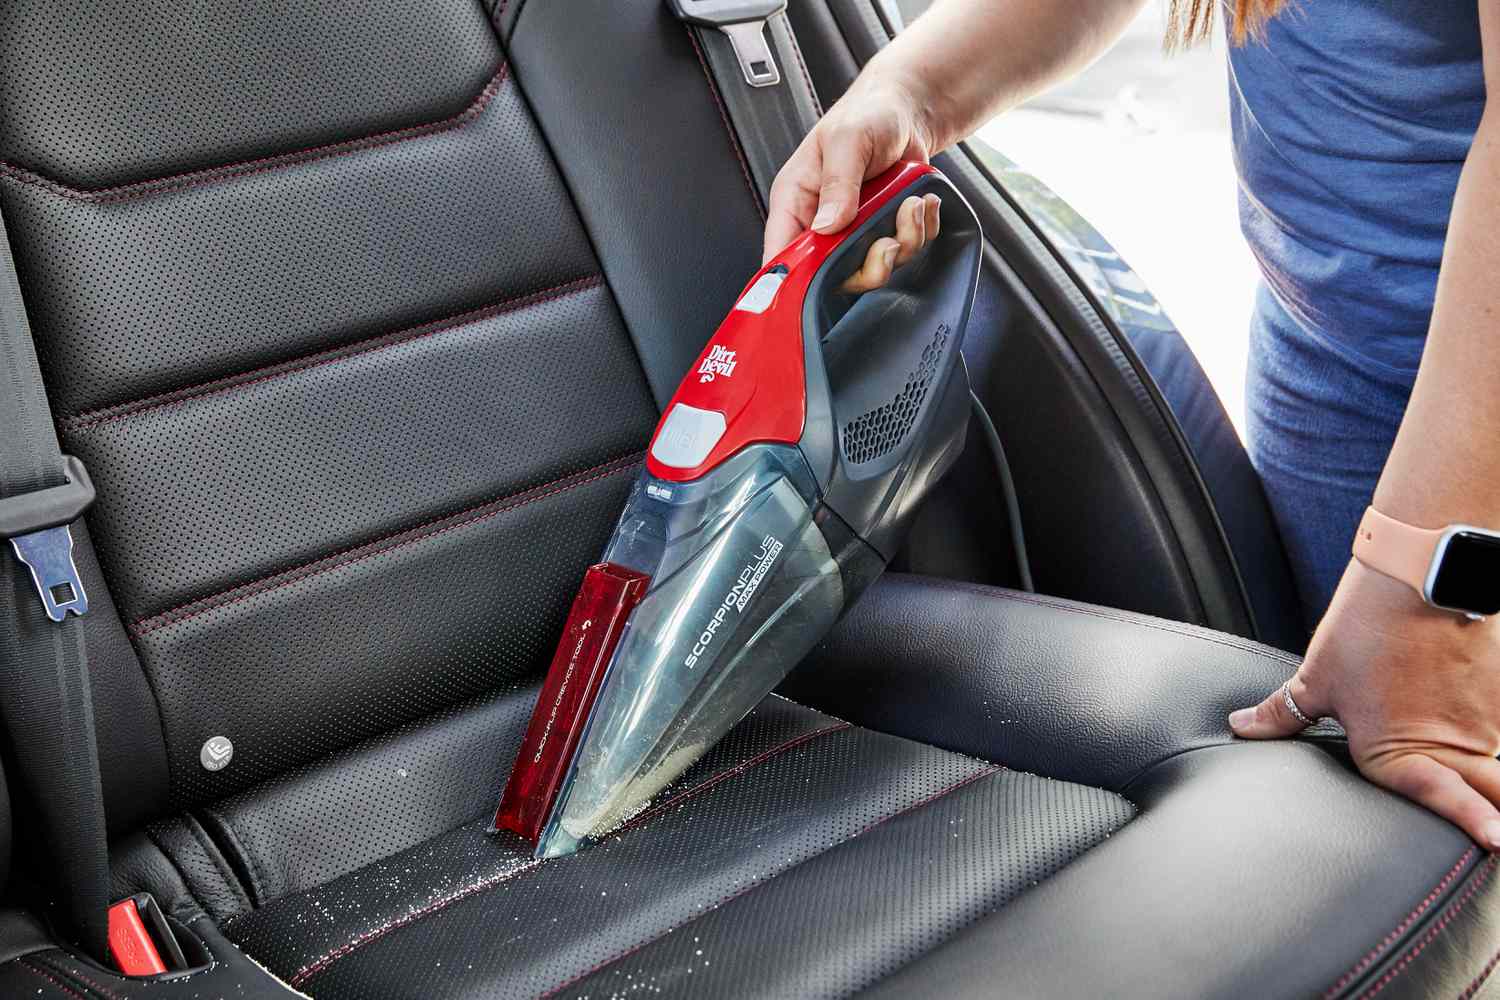 Person vacuuming the seat of a car with the Dirt Devil Scorpion Plus Corded Handheld Vacuum Cleaner